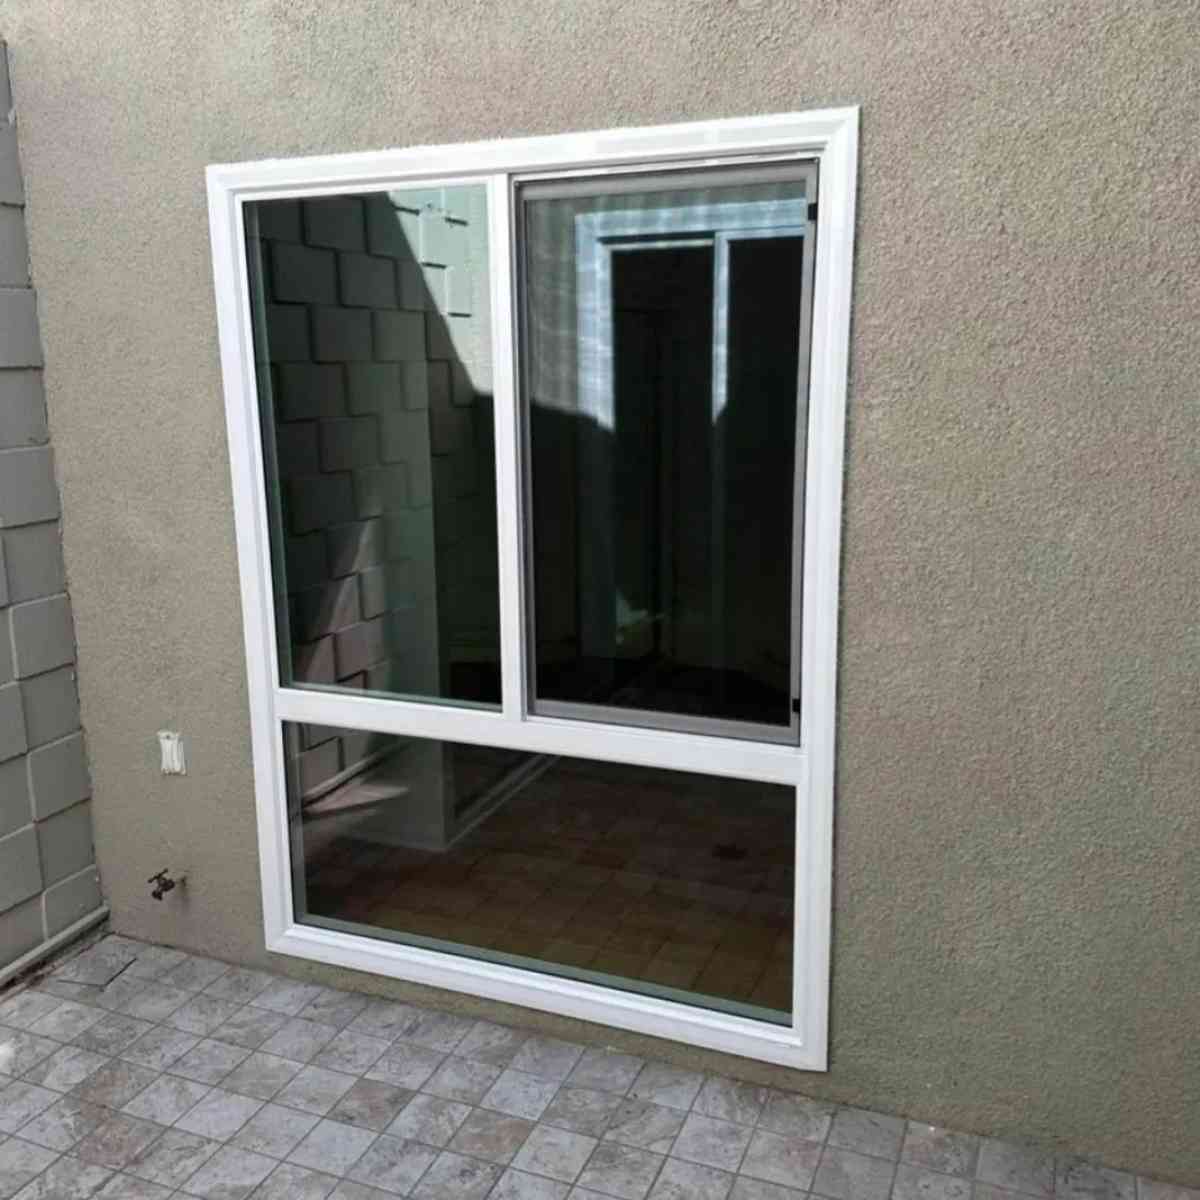 Windows and doors in the measurements you need